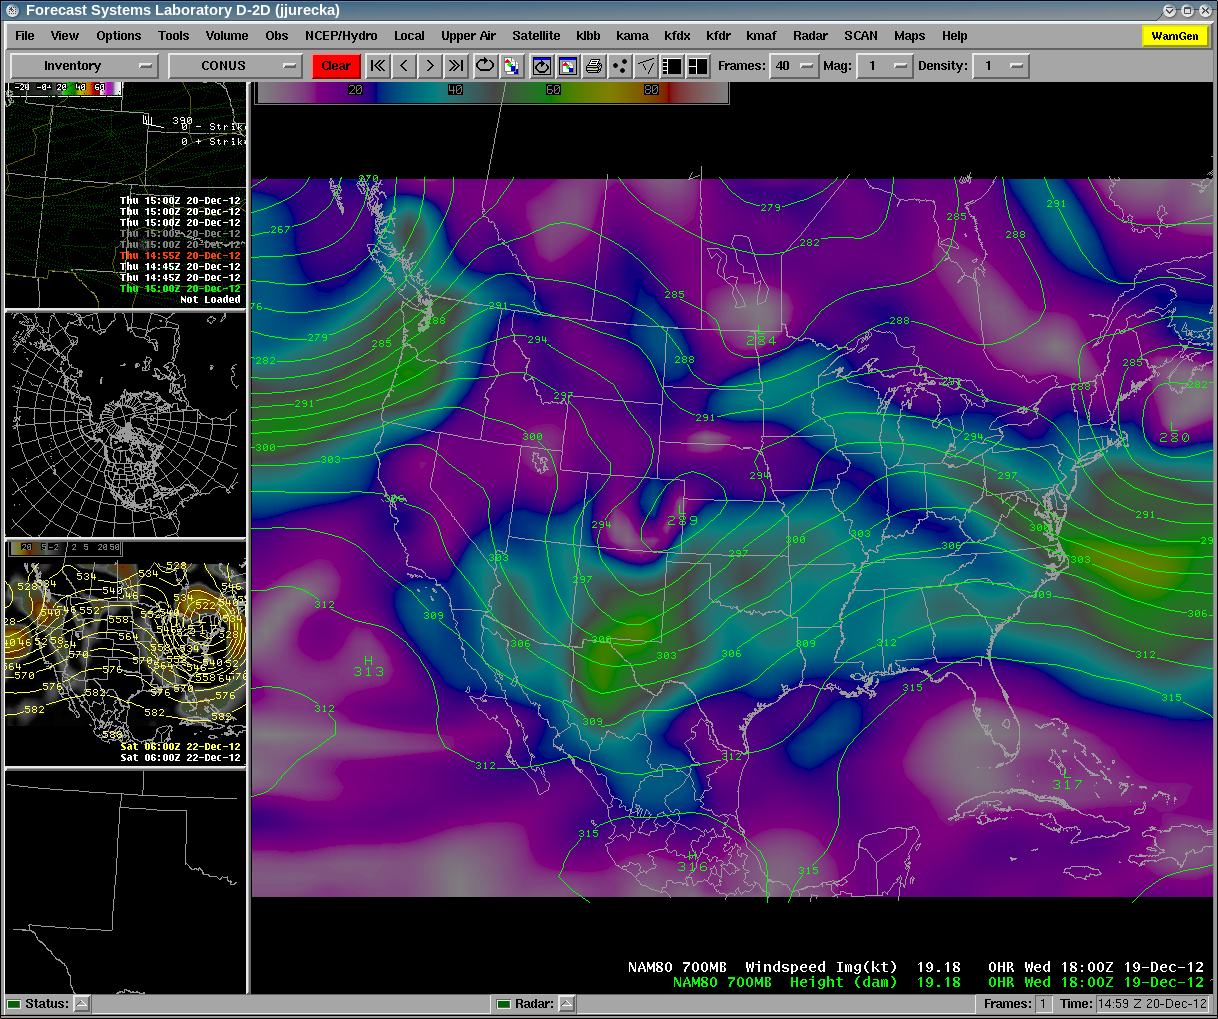 700mb analysis of weather image around noon CST on December 19th